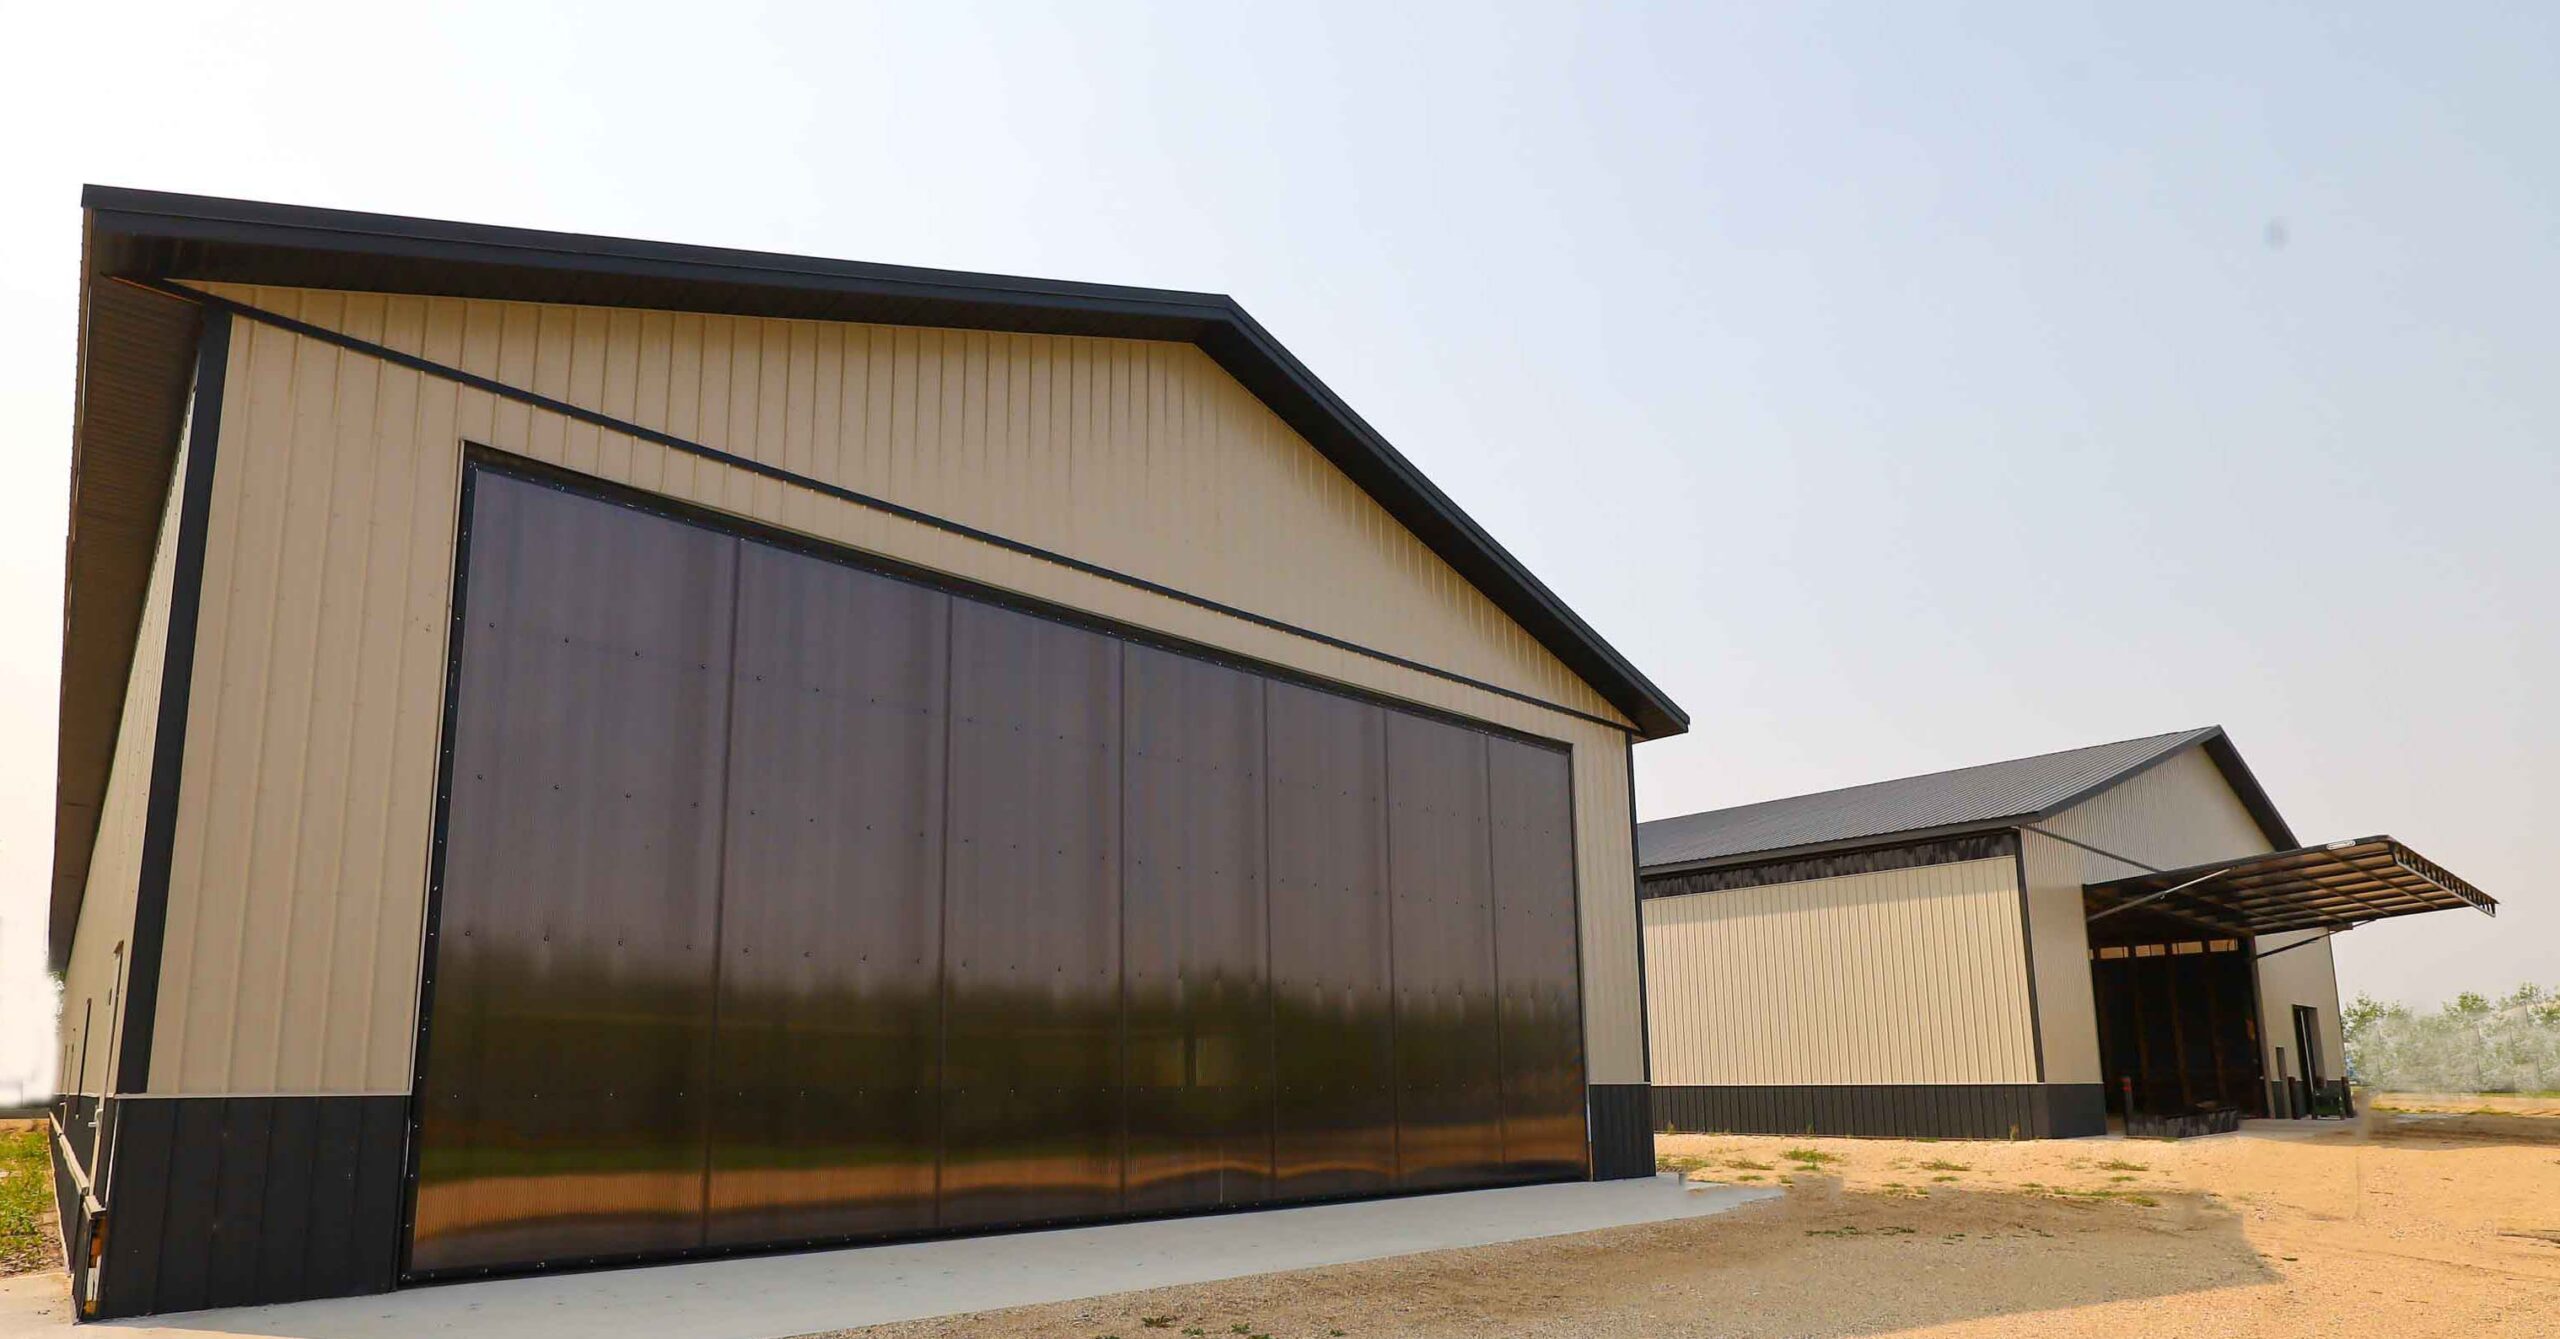 Hangar & machine shed w 4 PLift doors all 20' high AB post PS resized for website (25)